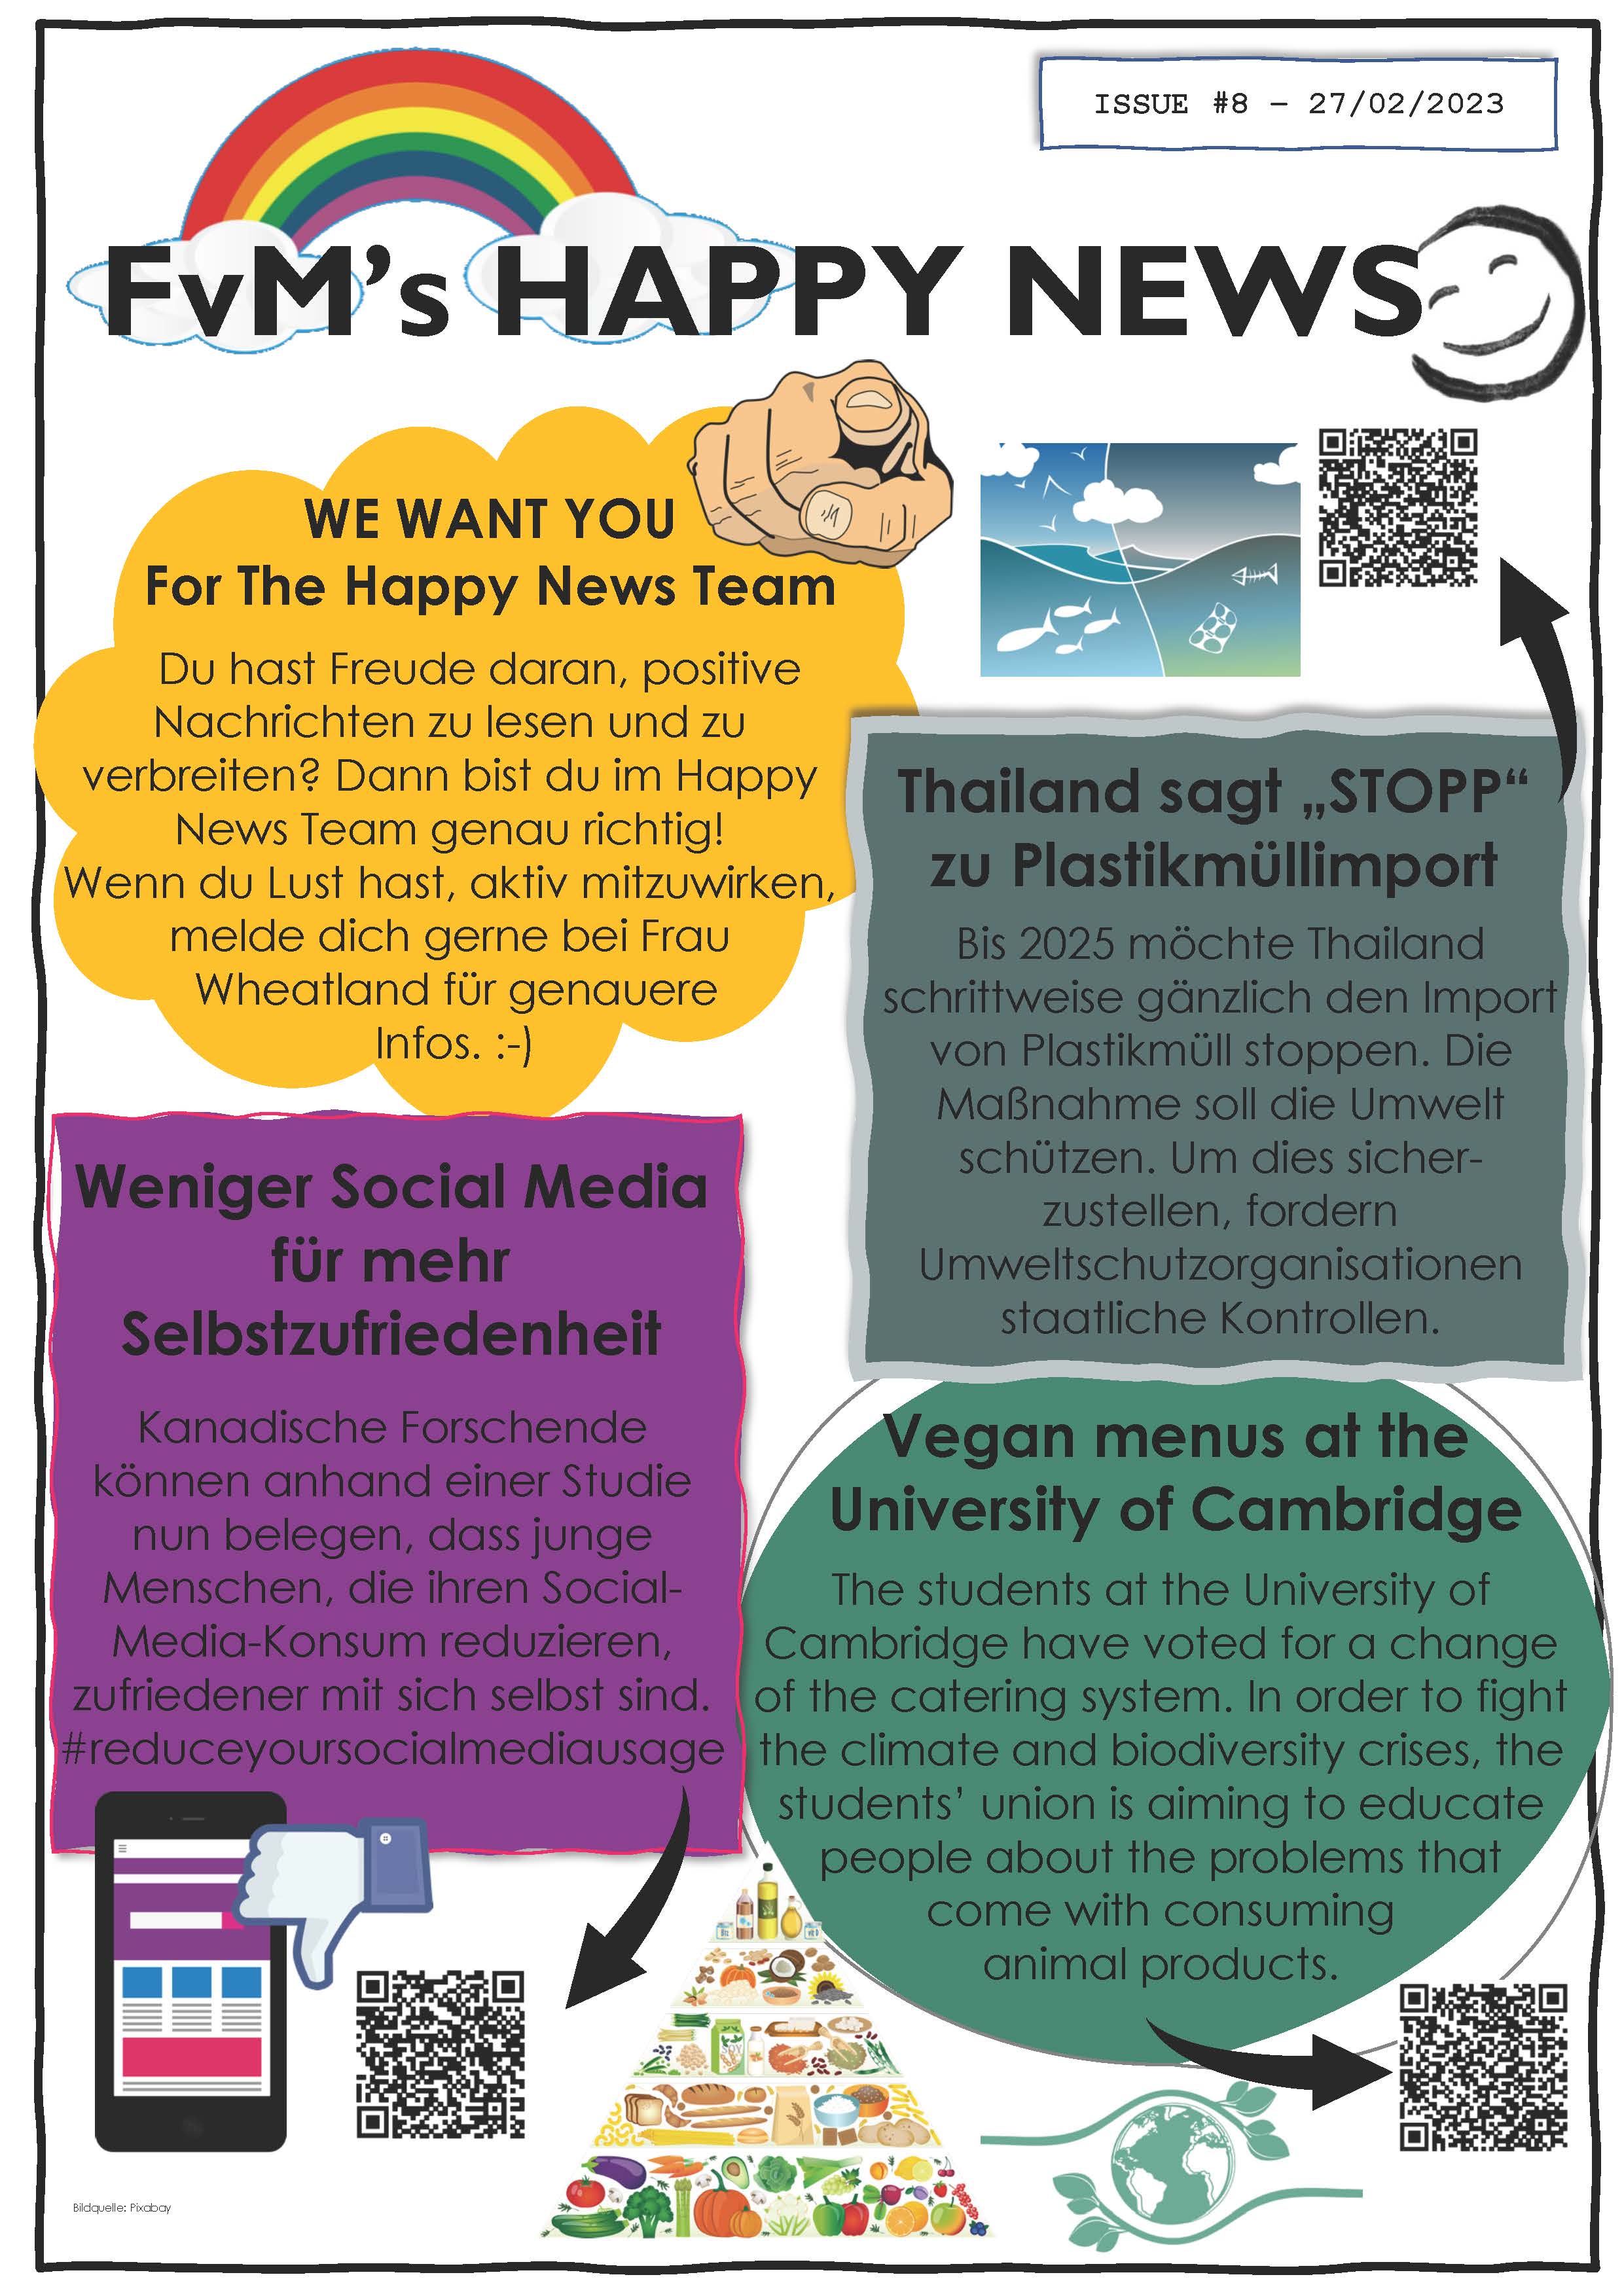 TheHappyNews Issue8 270223